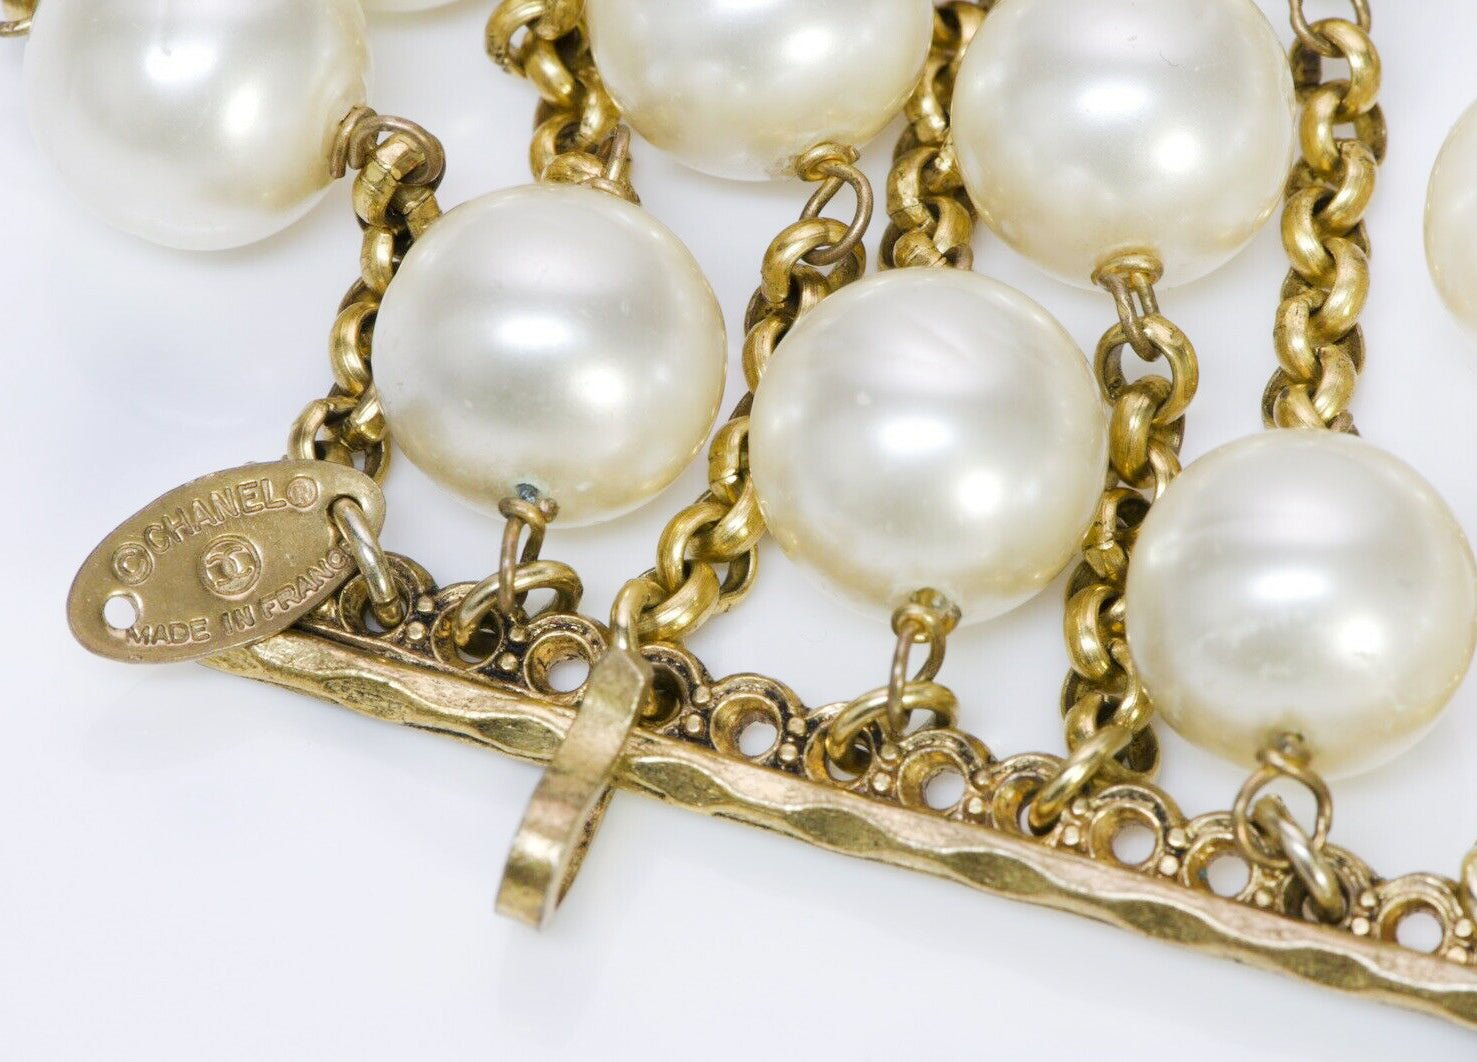 CHANEL Runway 1980’s Extra Wide Pearl Multi Strand Chain Bracelet